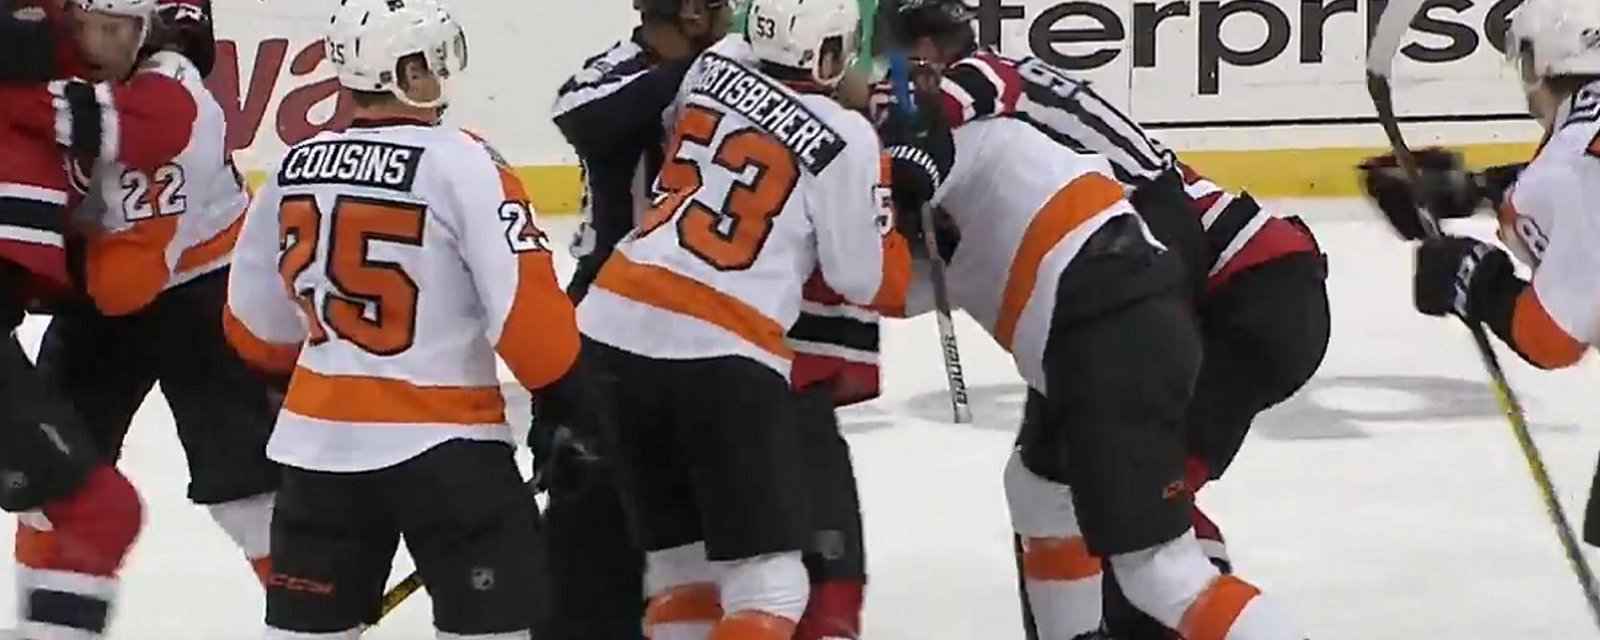 Devils go after the Flyers after collision at center ice leaves player injured.